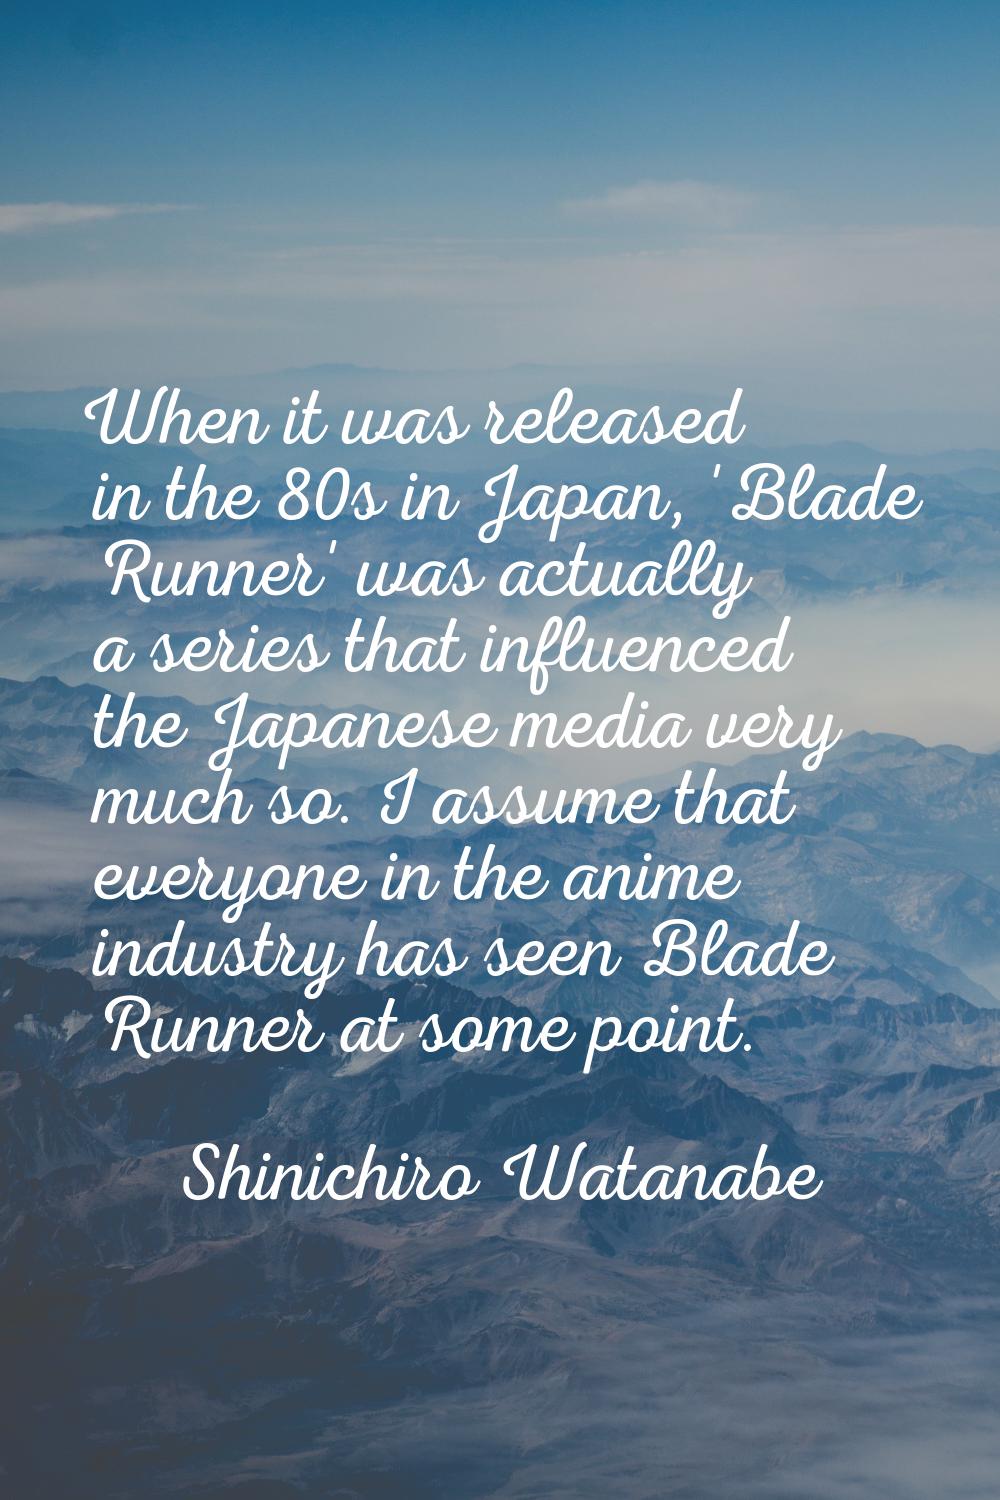 When it was released in the 80s in Japan, 'Blade Runner' was actually a series that influenced the 